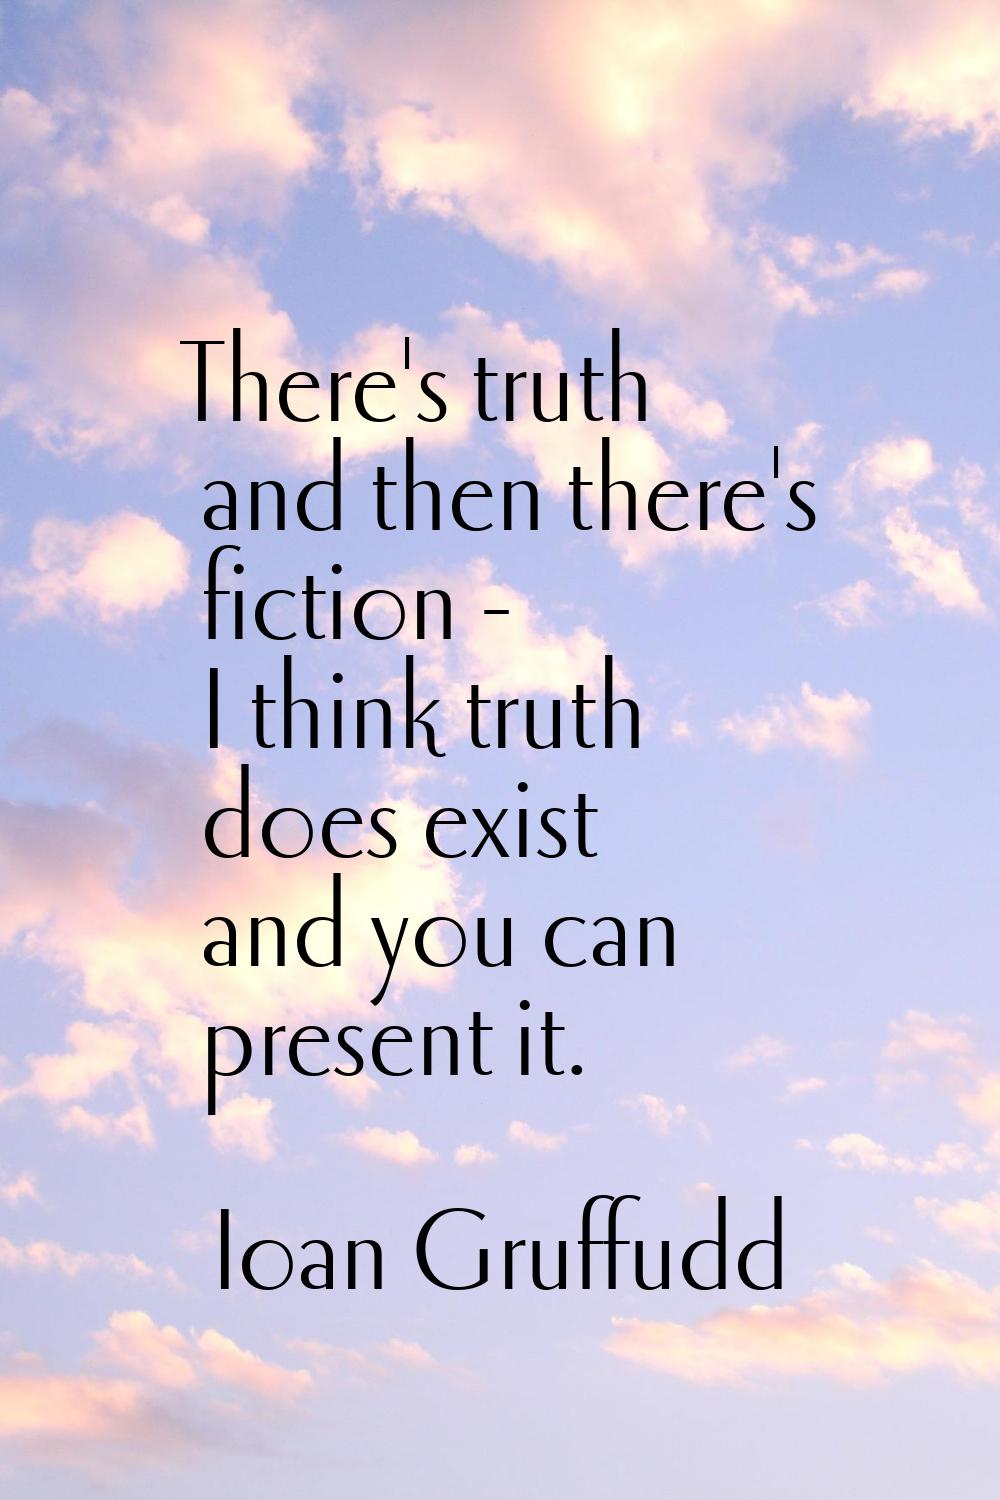 There's truth and then there's fiction - I think truth does exist and you can present it.